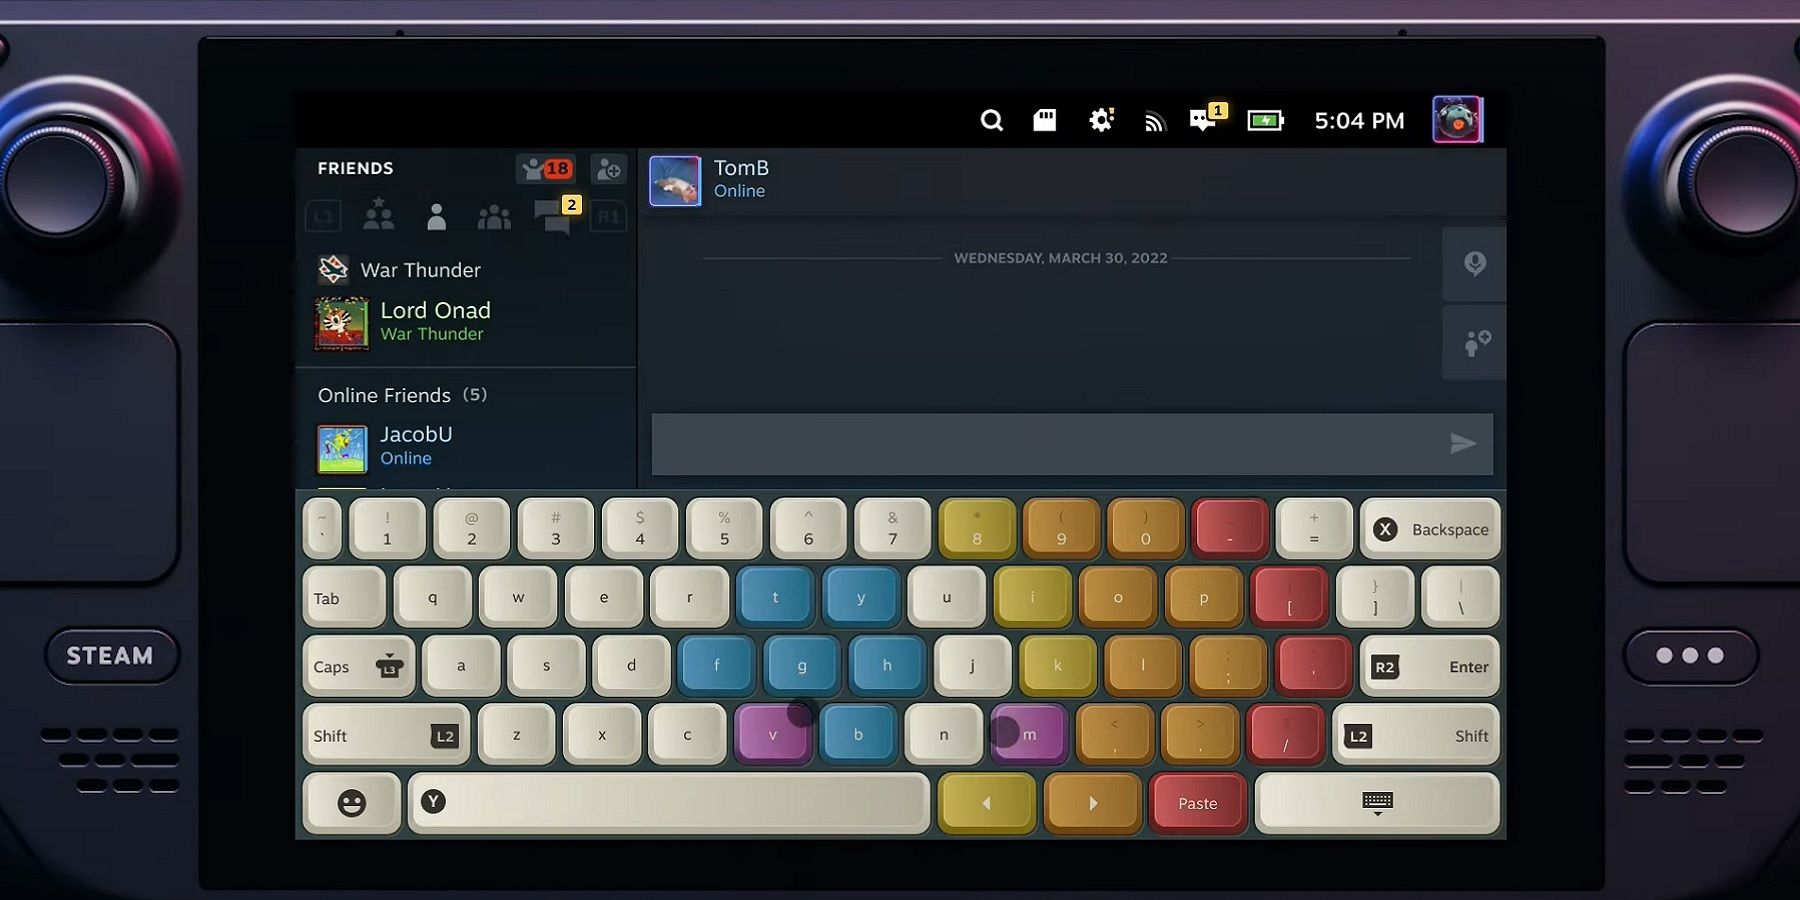 Close up image of a Steam Deck showing the onscreen keyboard.